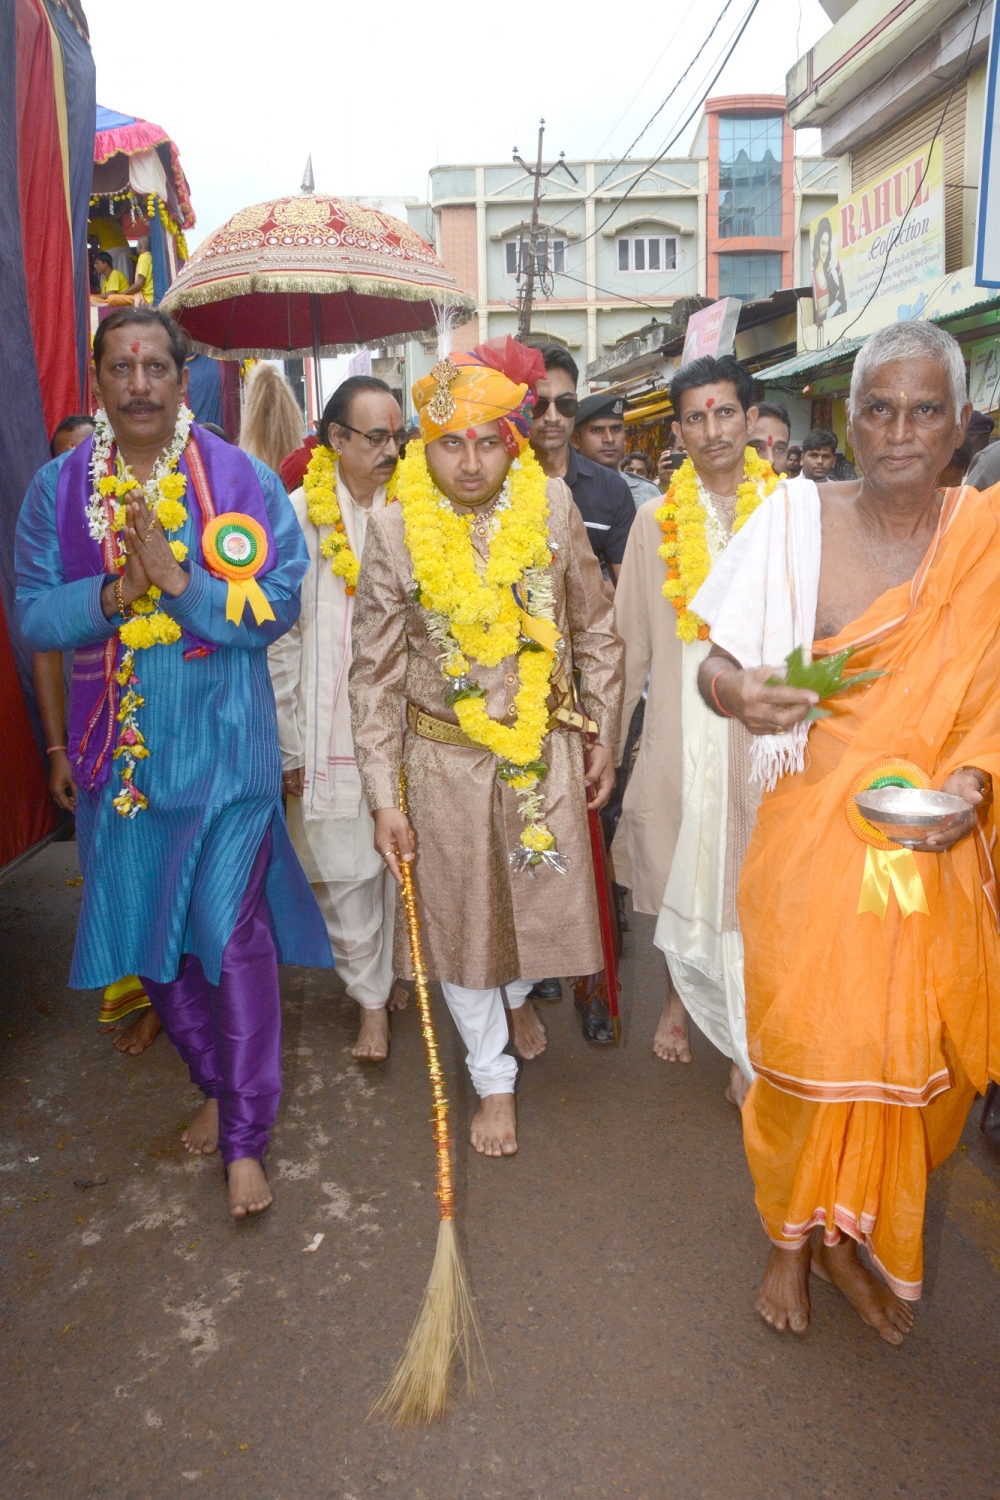 The king inaugurates the rath yatra by brooming the street, making way for the rath